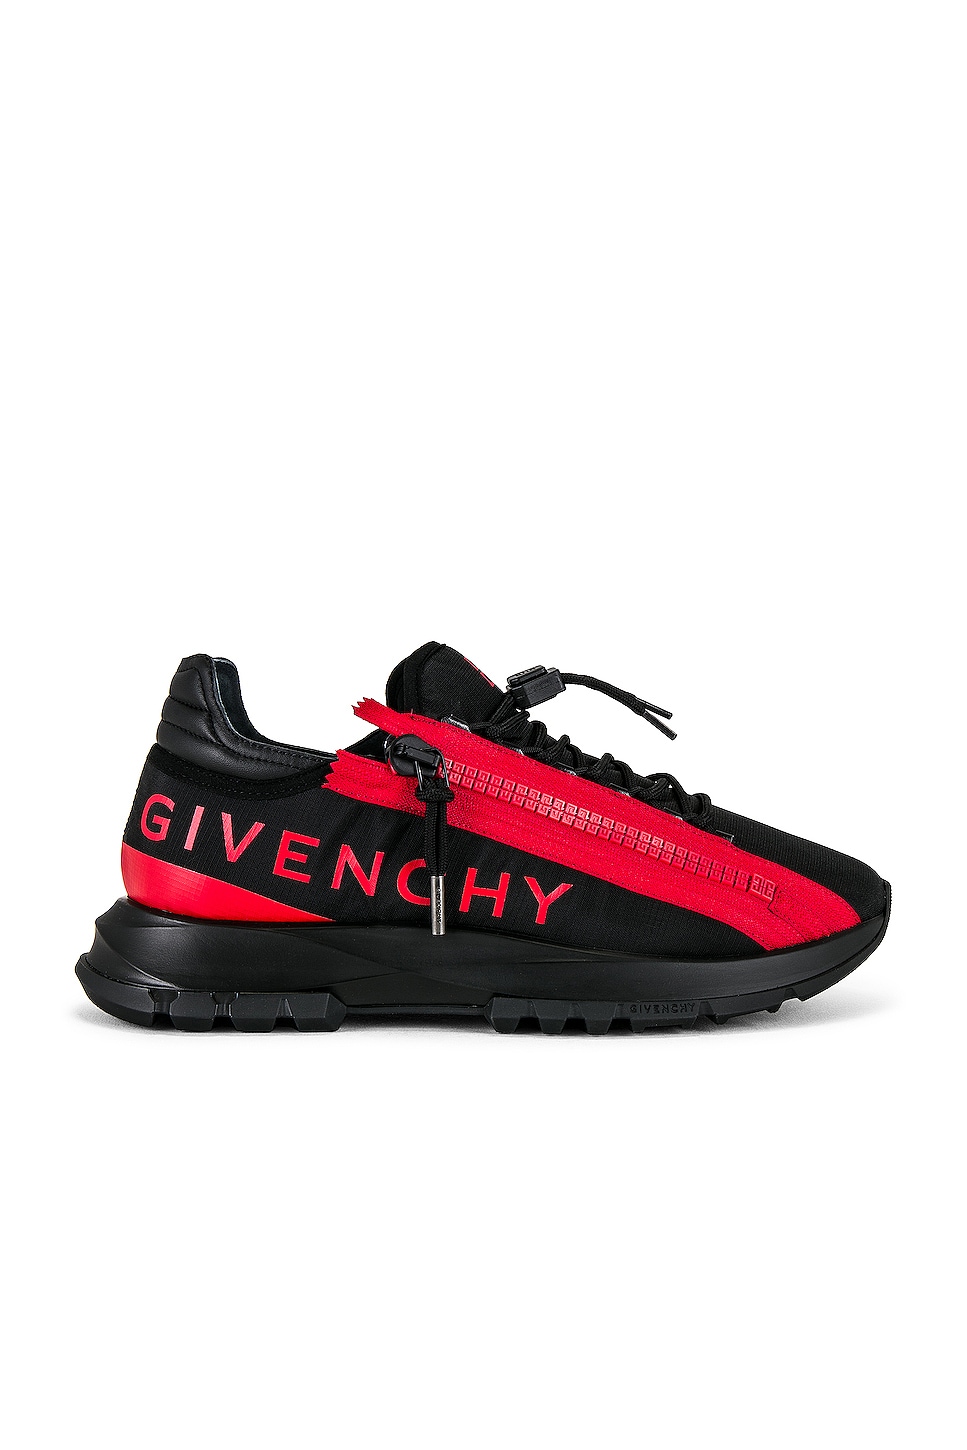 Image 1 of Givenchy Spectre Zip Runners Sneaker in Black & Red